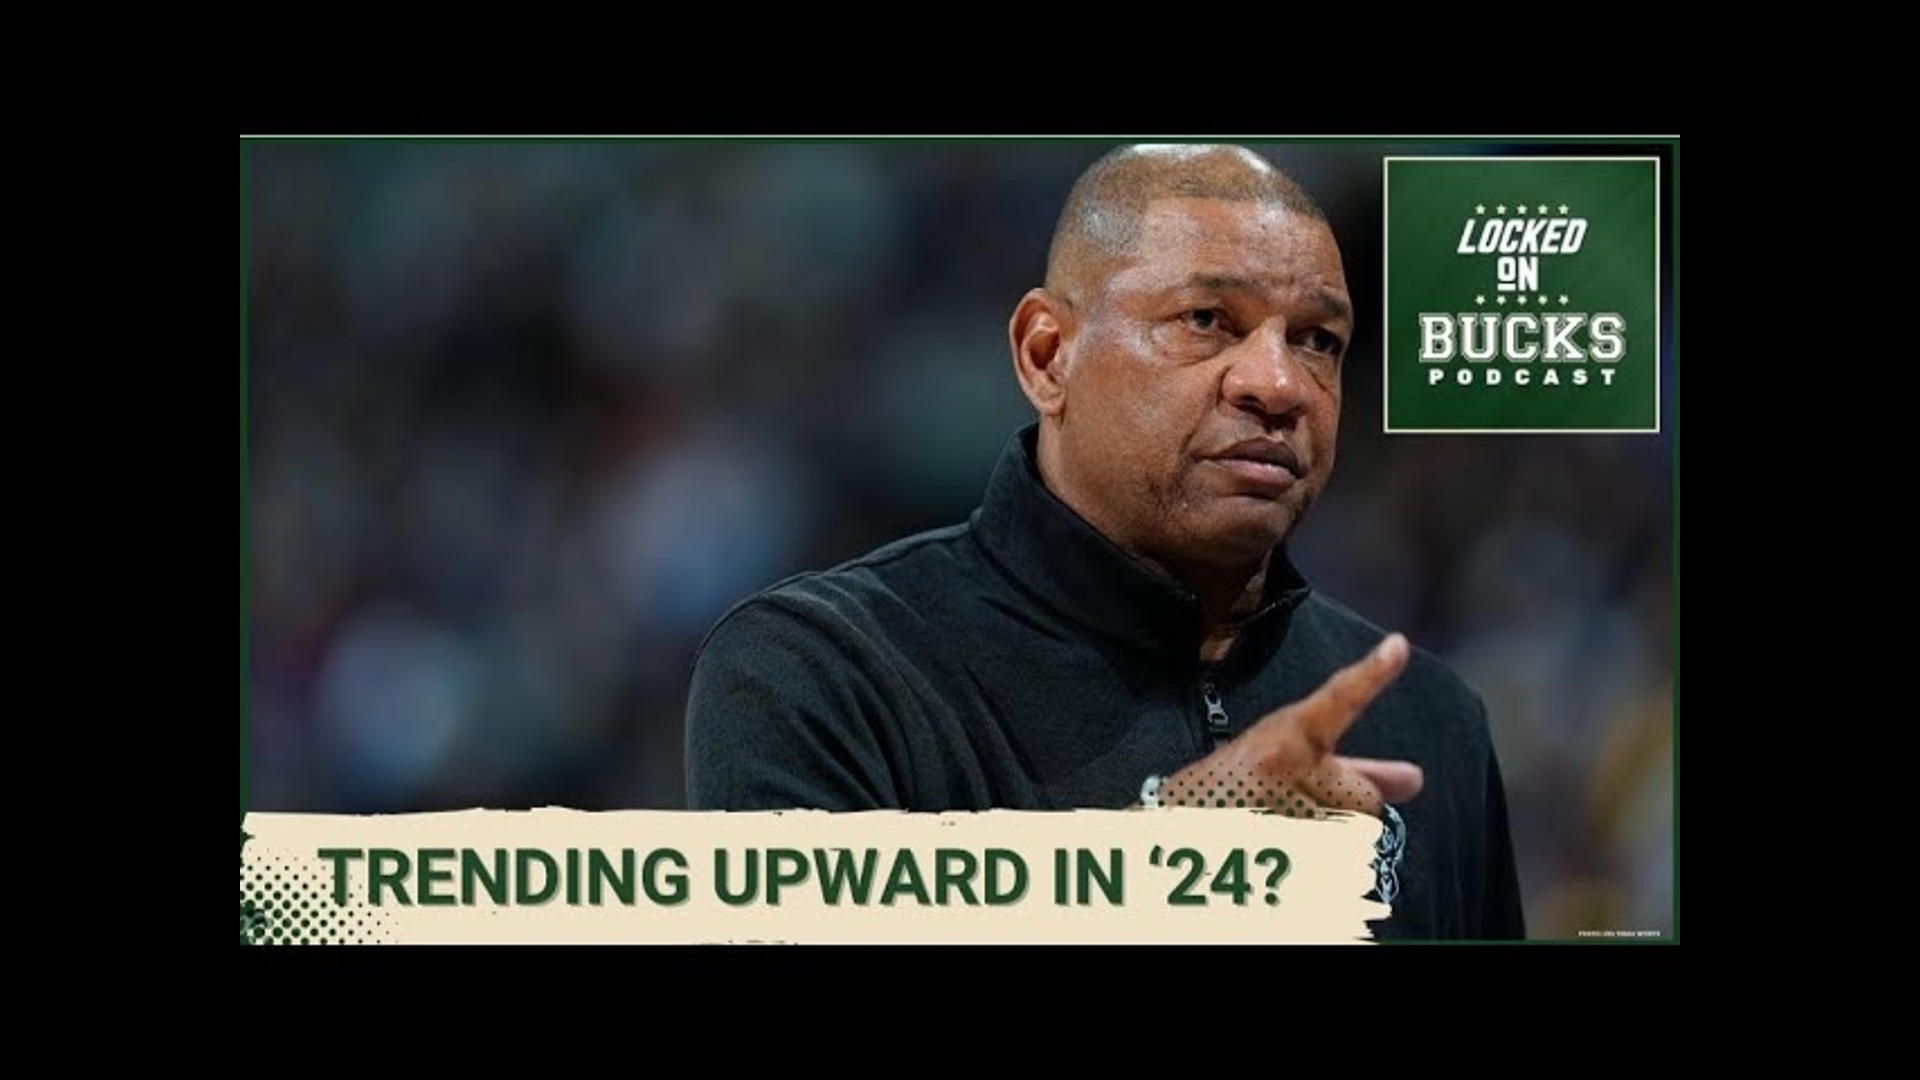 Justin and Camille take a look back at the 25 year coaching career of Doc Rivers.